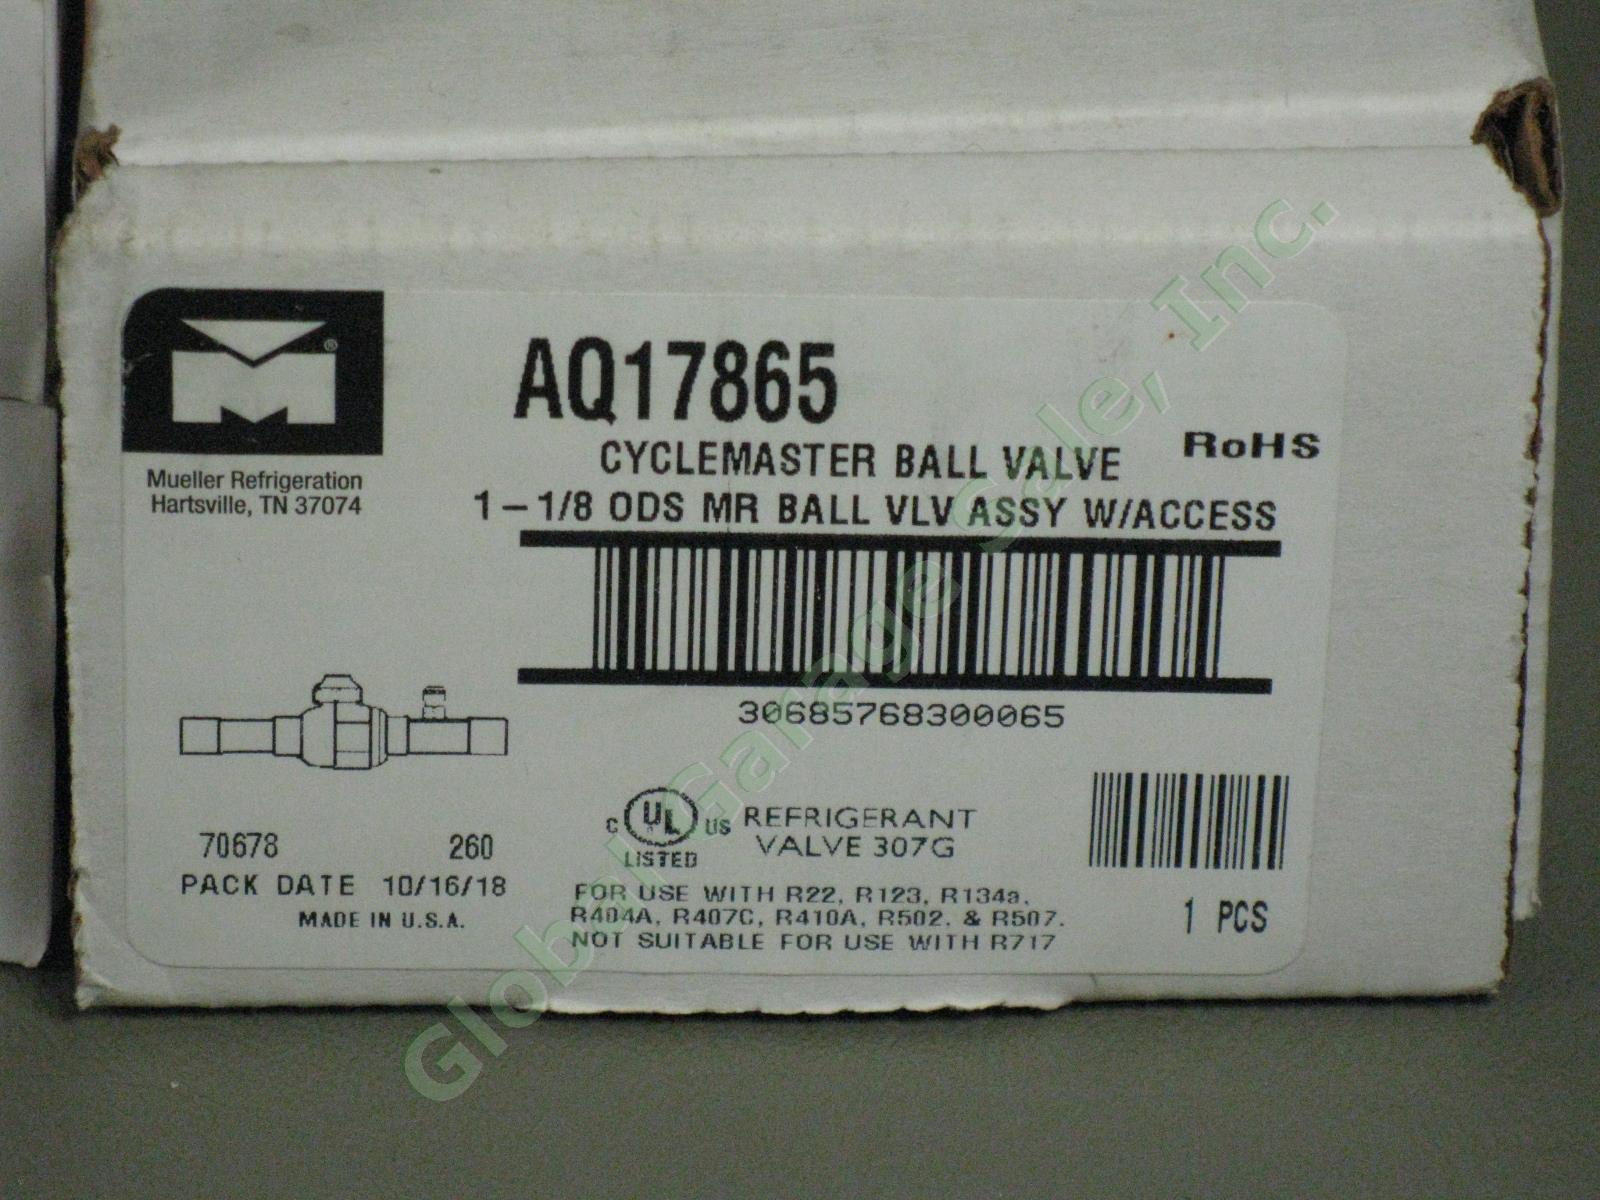 7 Mueller Refrigeration Cyclemaster Ball Valve LOT Collection with Access NIB NR 4